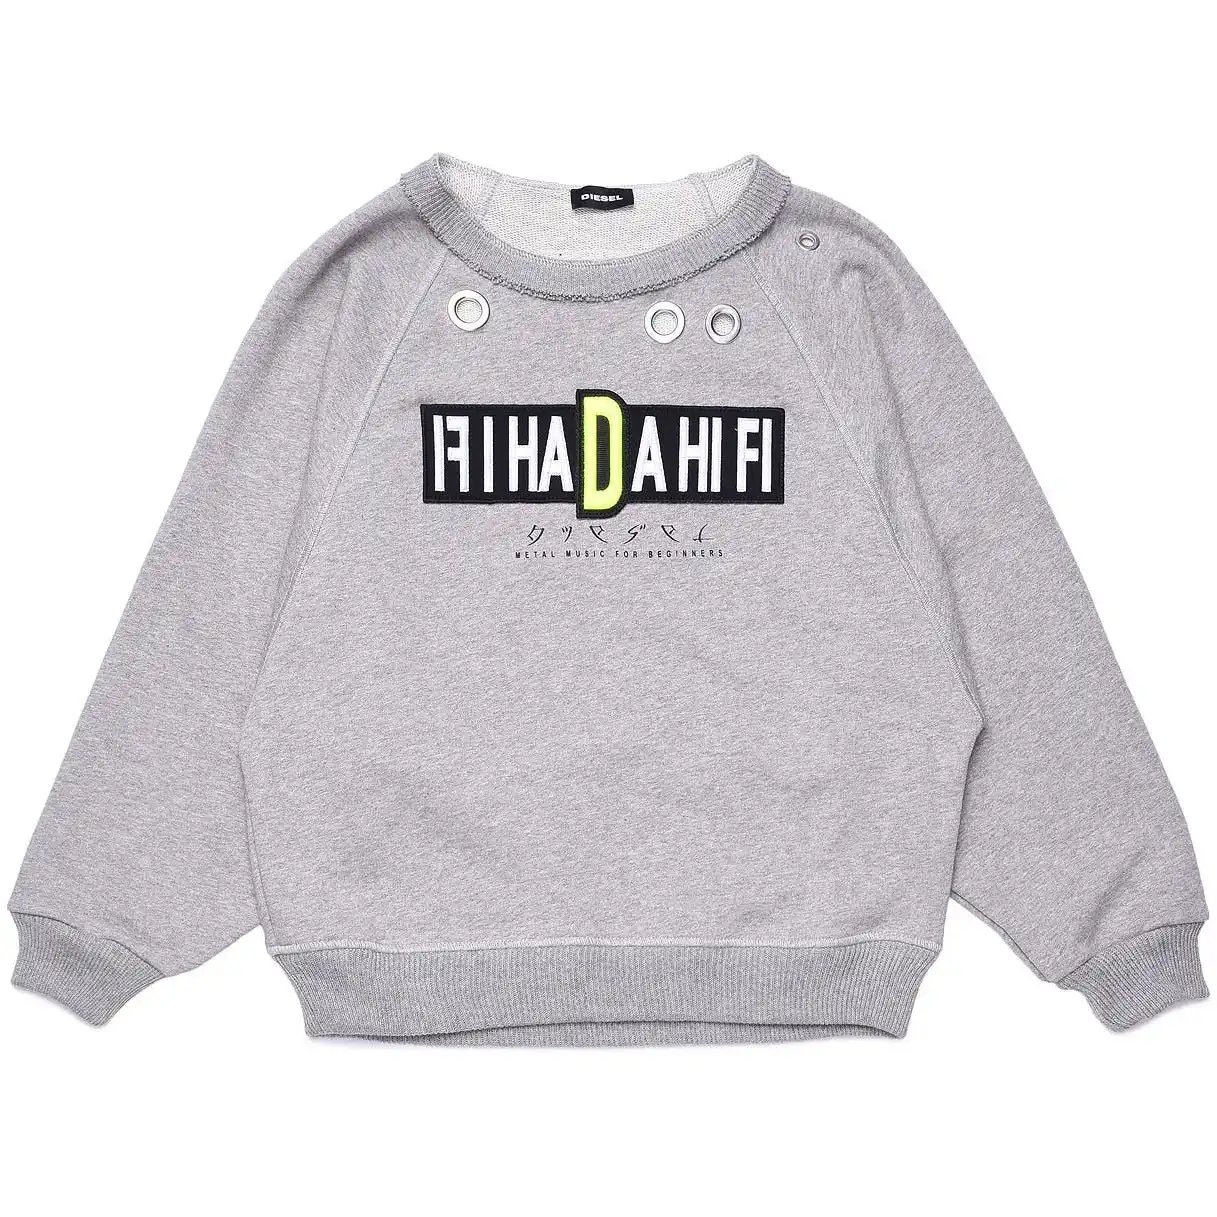 Diesel Girls Grey Sweater with Eyelet Design and Text